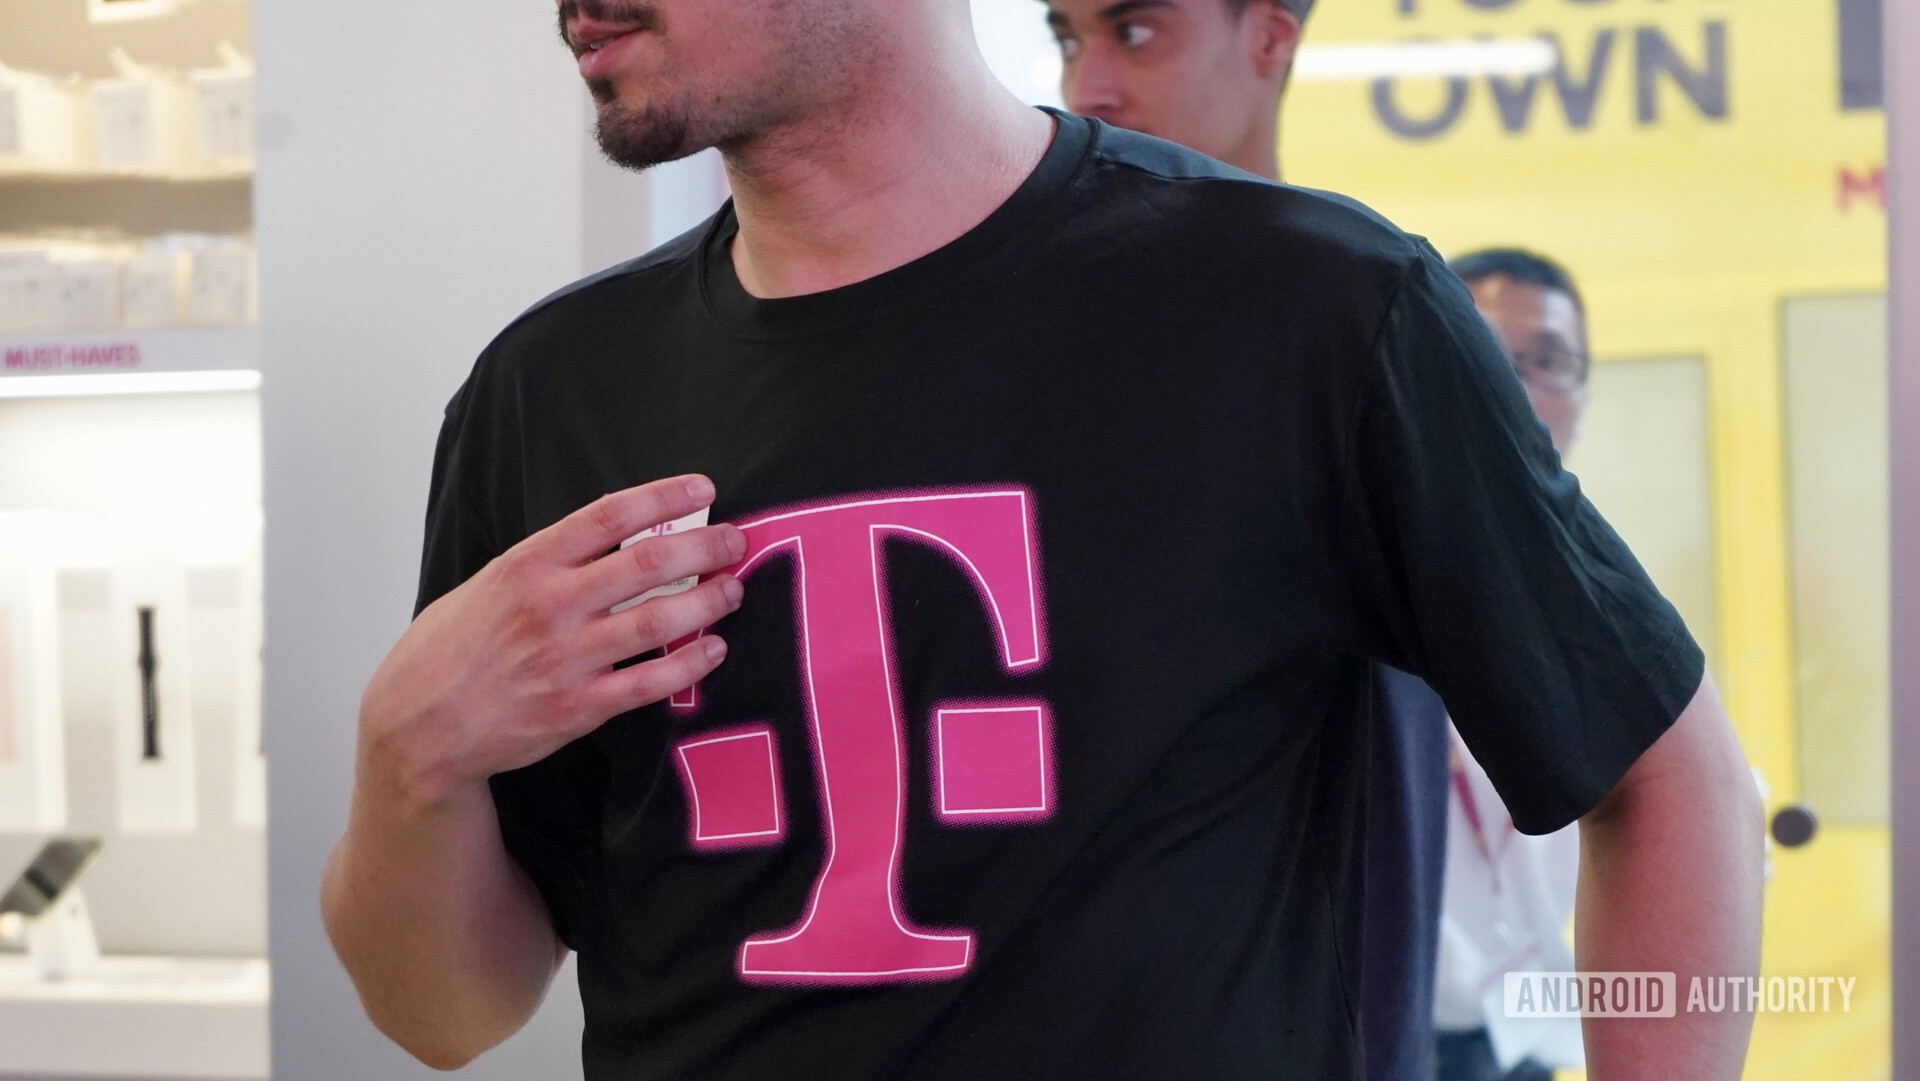 A T-Mobile employee wearing a black t-shirt with the T-Mobile logo - Headphone jack not working